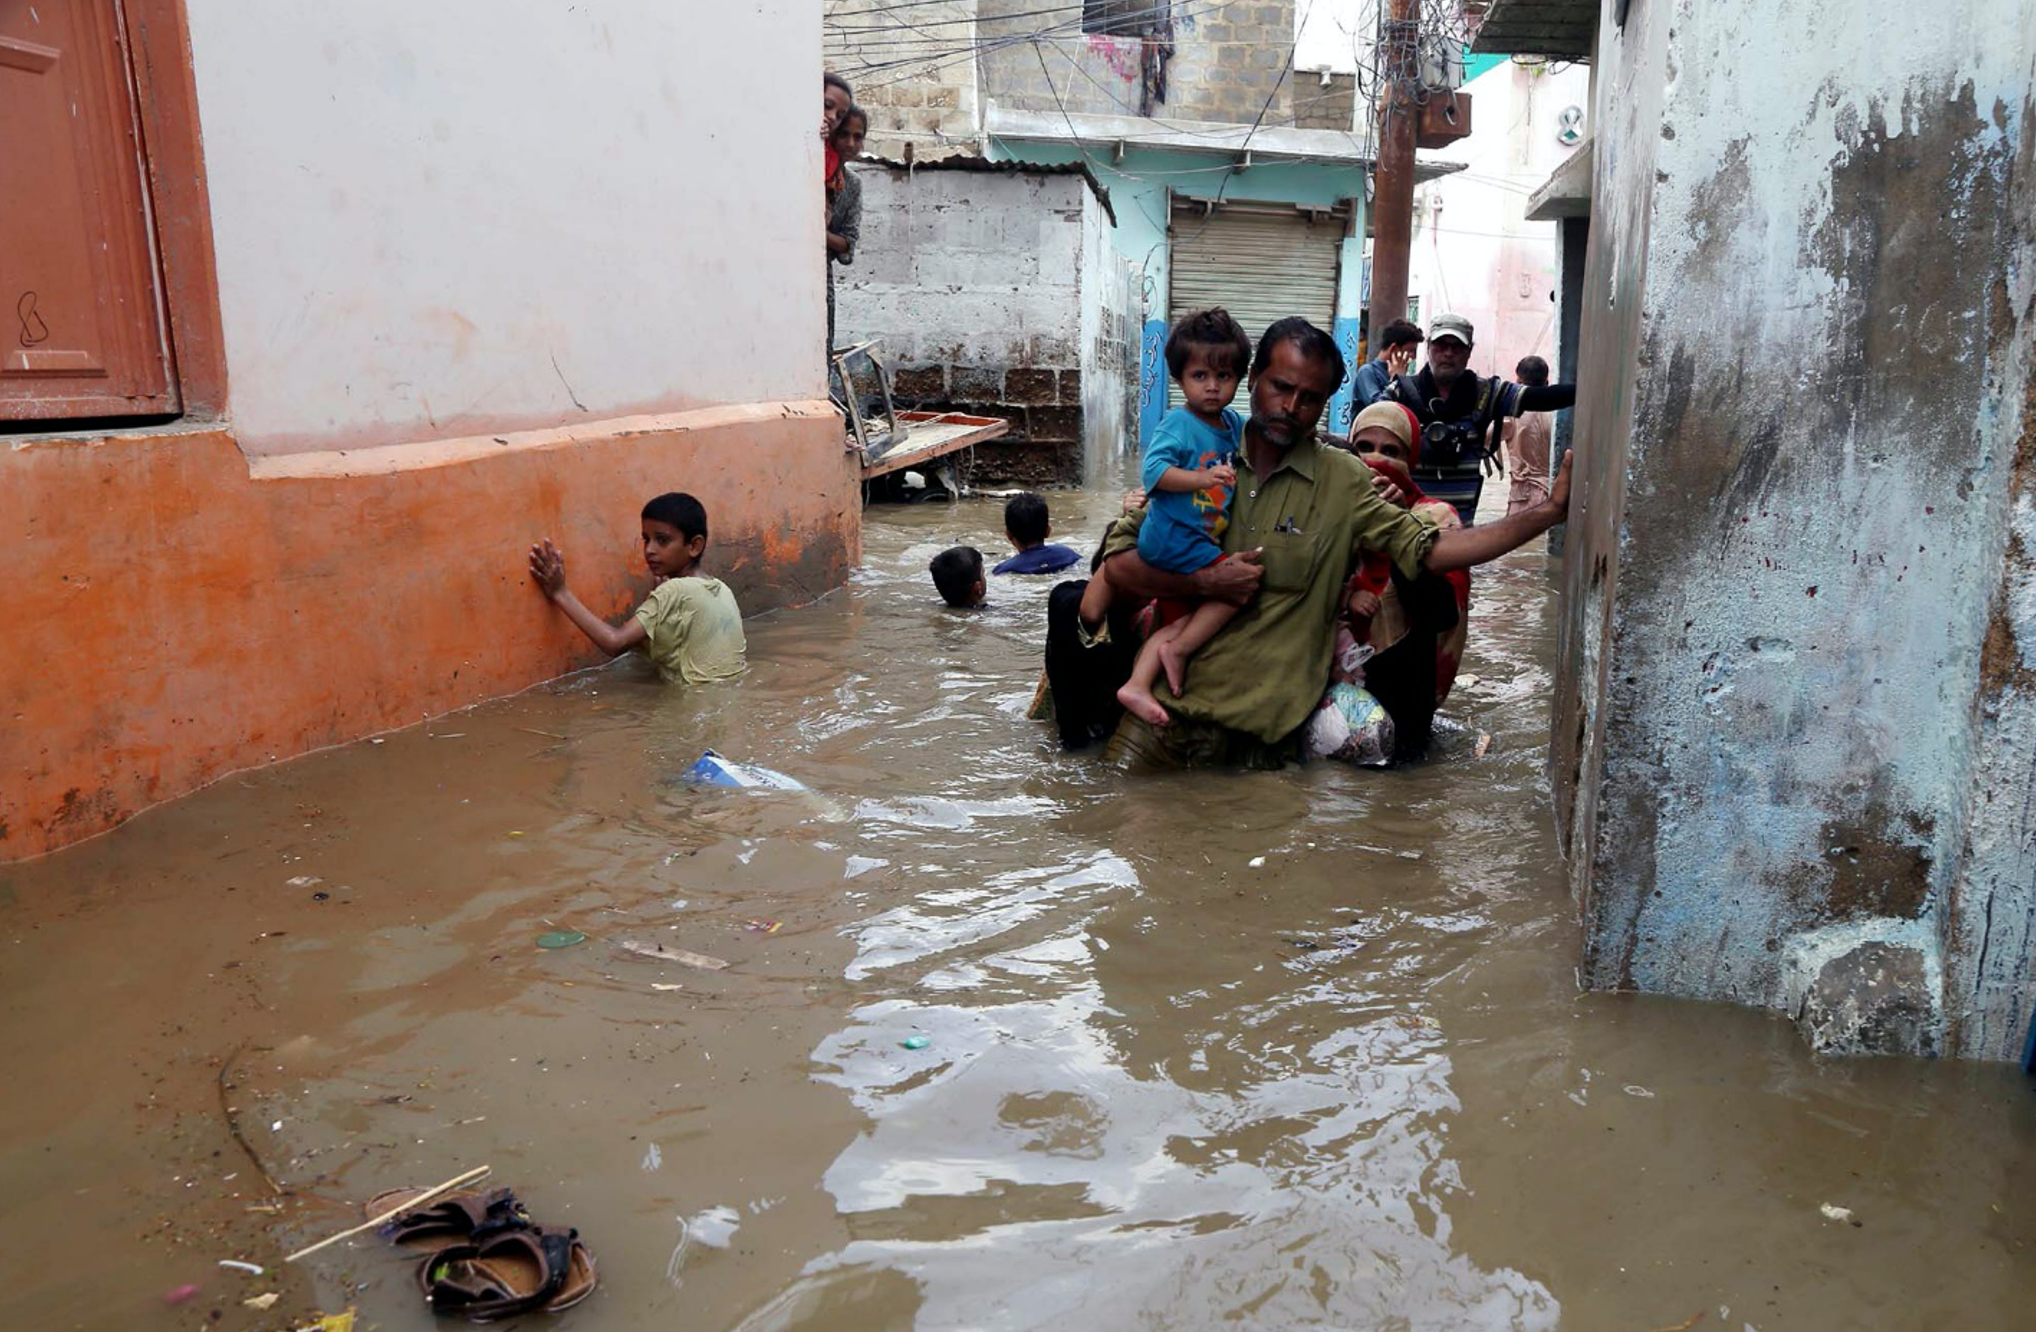 © Shutterstock.com: A flooded street in Karachi. Pakistan experiences frequent floods due to heavy monsoon rainfalls